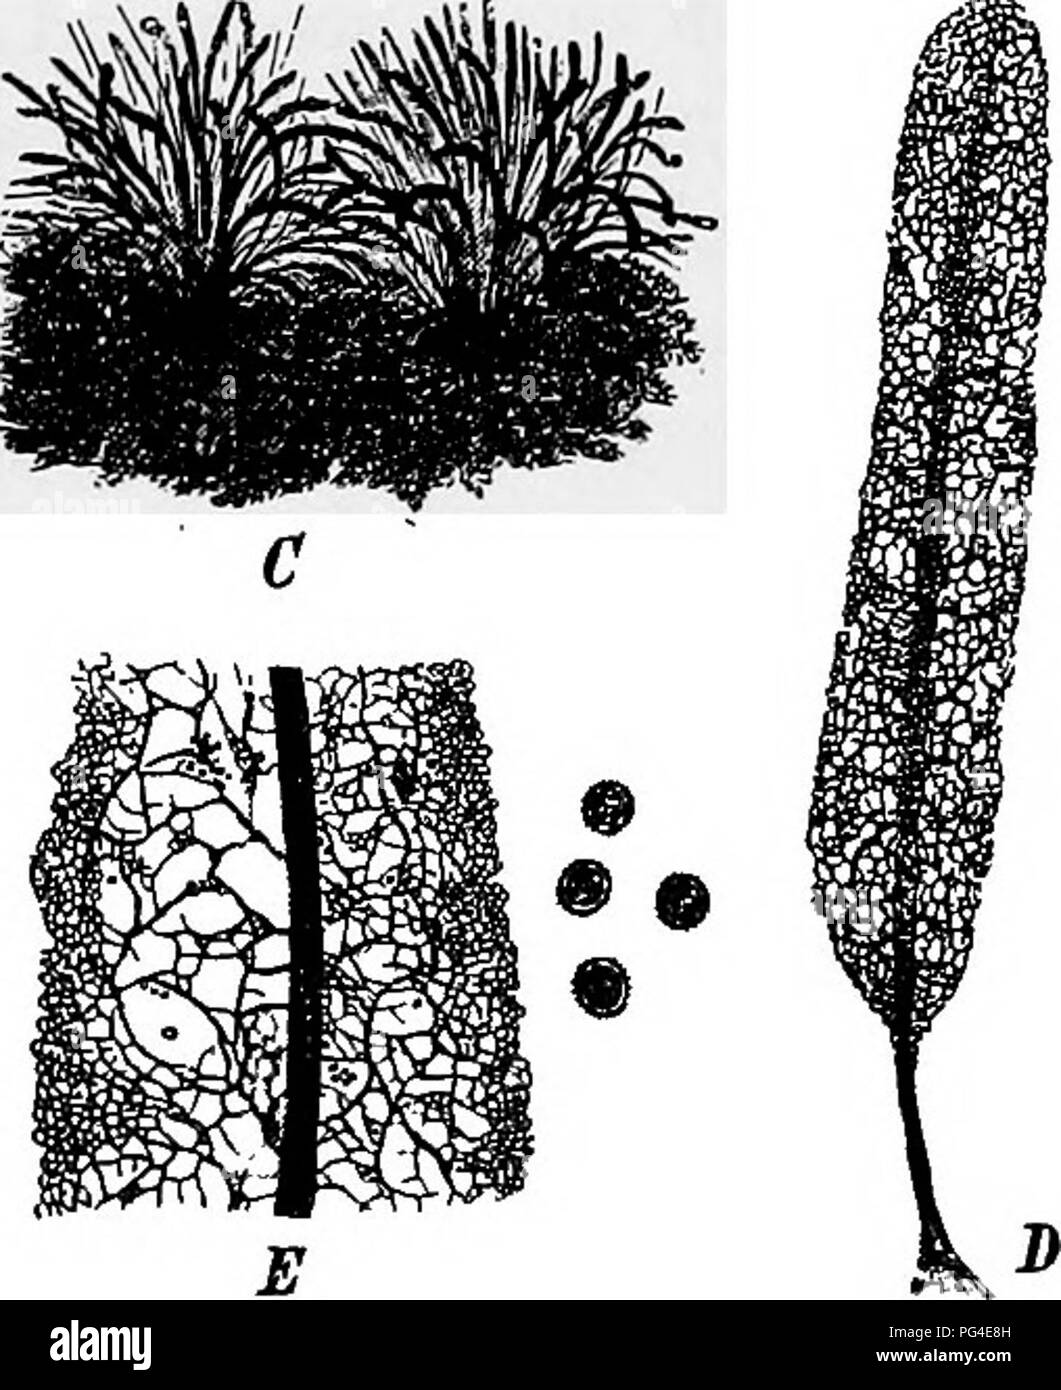 . A text-book of mycology and plant pathology . Plant diseases; Fungi in agriculture; Plant diseases; Fungi. 14 MYCOLOGY rather uniformly through the spore plasm and are of unequal size. Vacuoles are formed in a still further condensation of the sporangial protoplasm and each of these apparent vacuoles is pierced by a capilli- tial thread which runs through its central axis. Droplets of water are formed along the capilUtial thread as a still further evidence of water extrusion. Cleavage planes now appear at the periphery of the mass of sporangial protoplasm and progress inwardly toward the cen Stock Photo